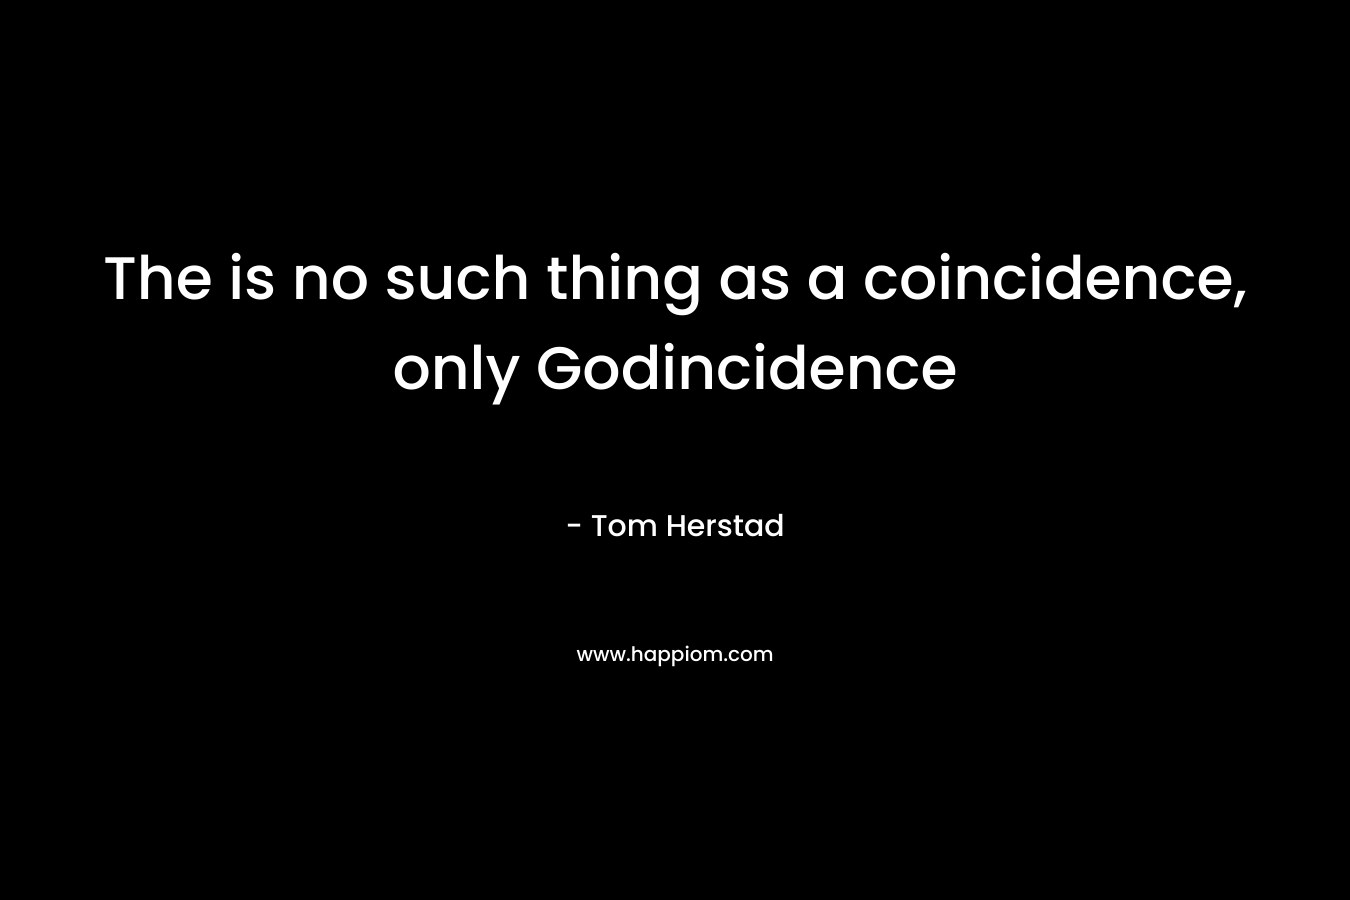 The is no such thing as a coincidence, only Godincidence